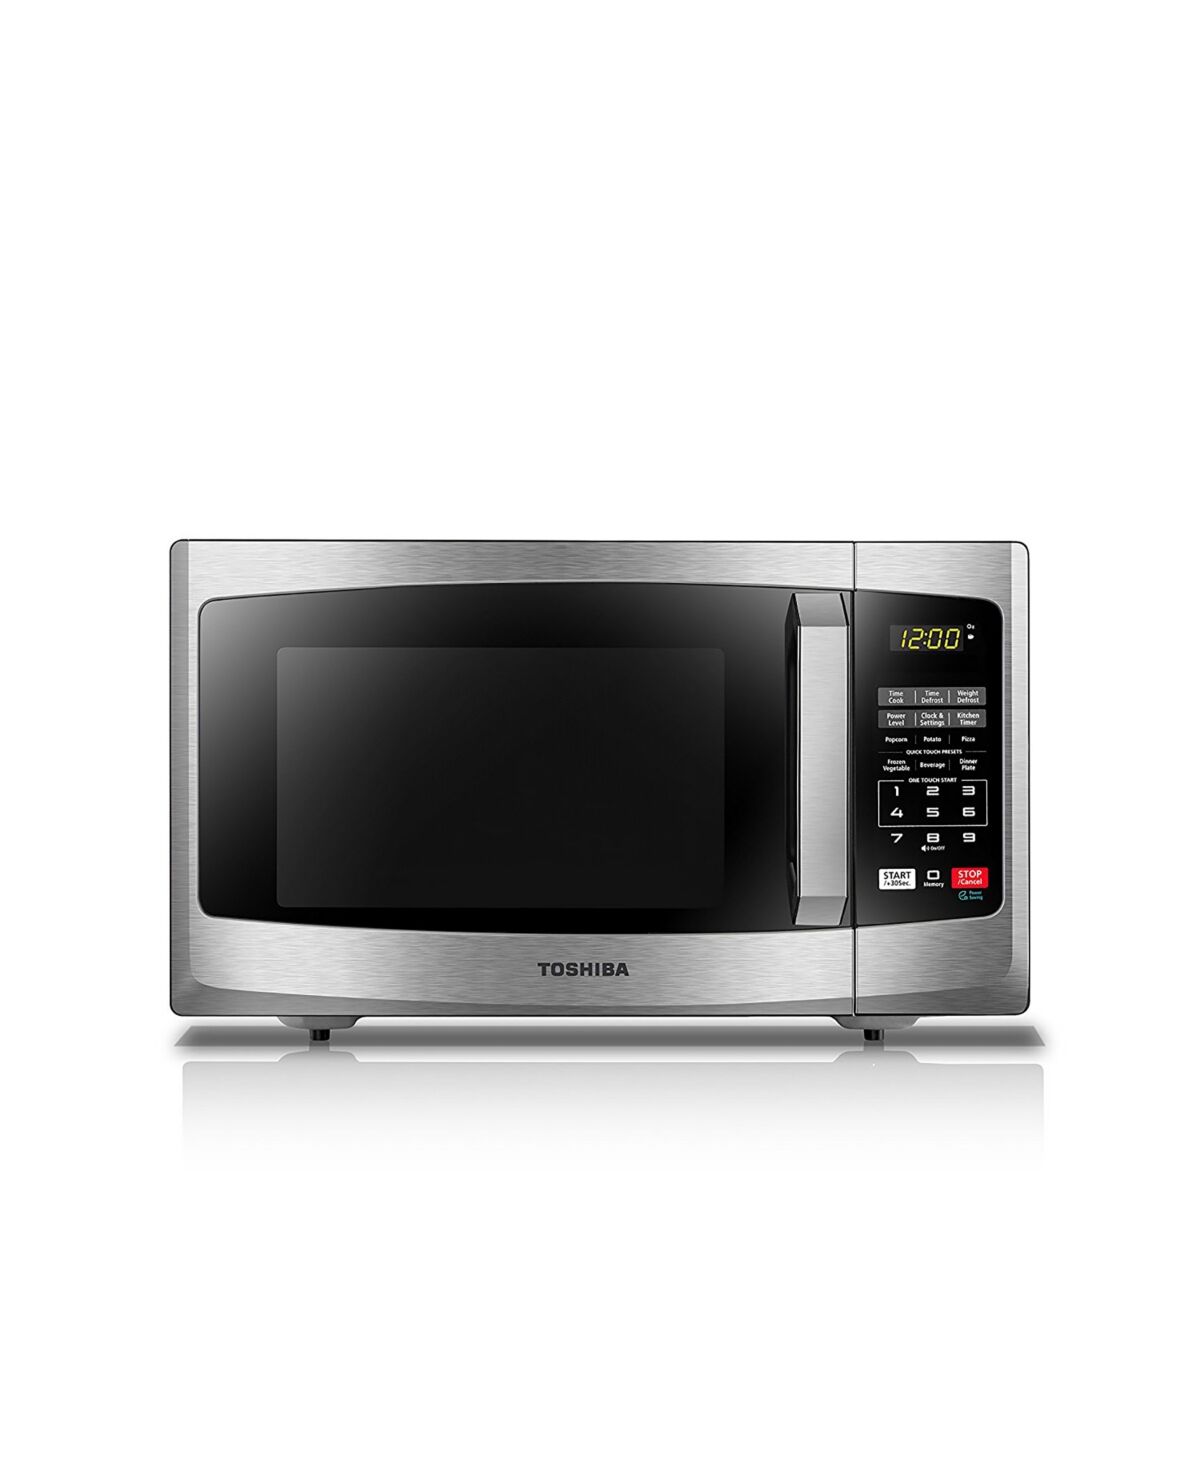 Toshiba 0.9 Cubic Feet Microwave - Stainless Steel